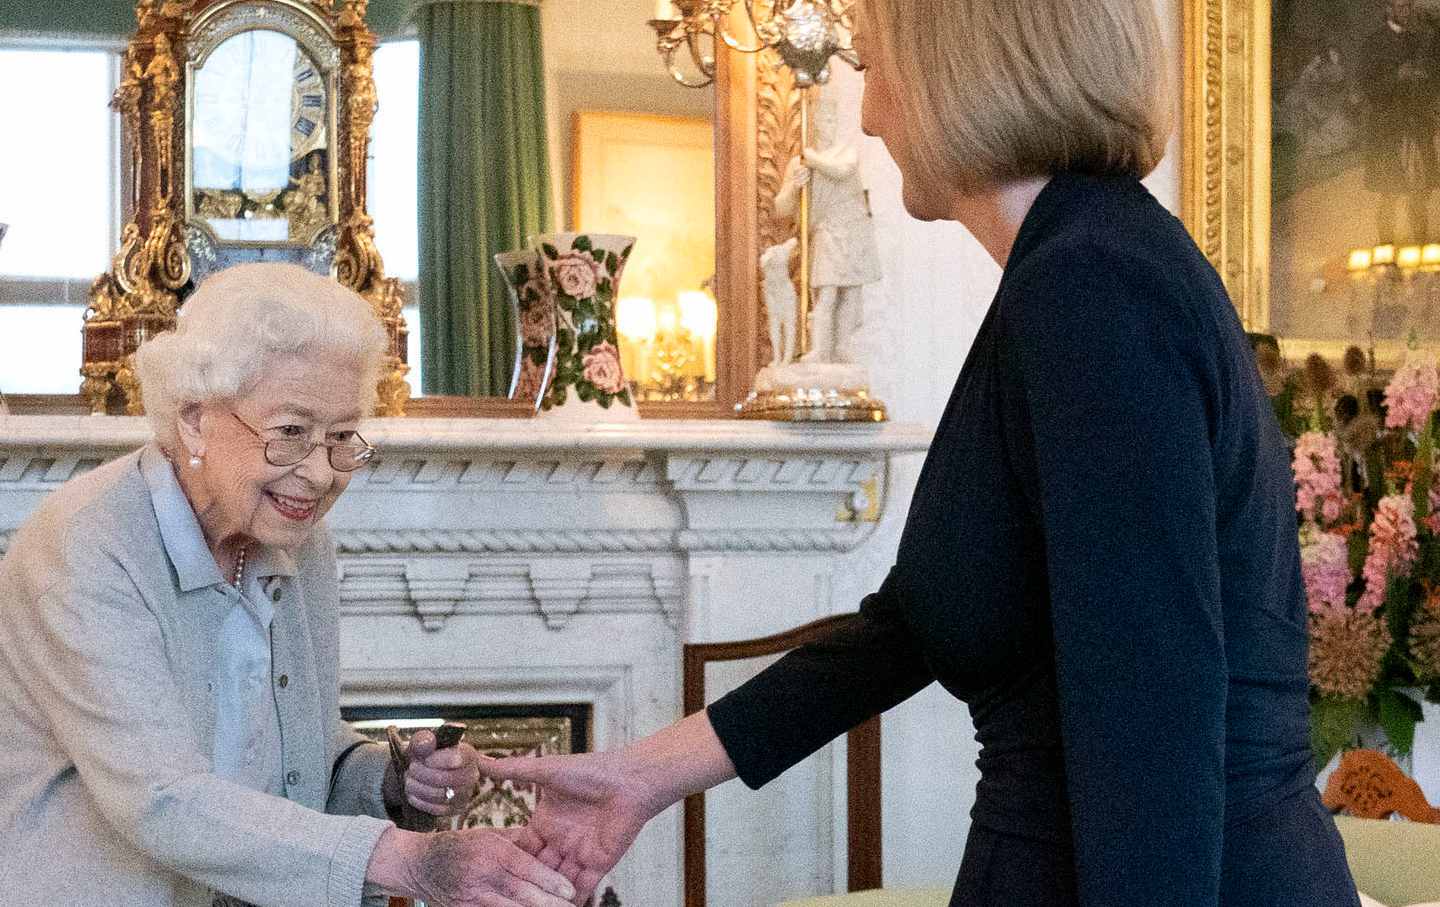 Queen Elizabeth shakes hands with newly elected leader of the Conservative party Liz Truss in an opulent room in Balmoral Castle.